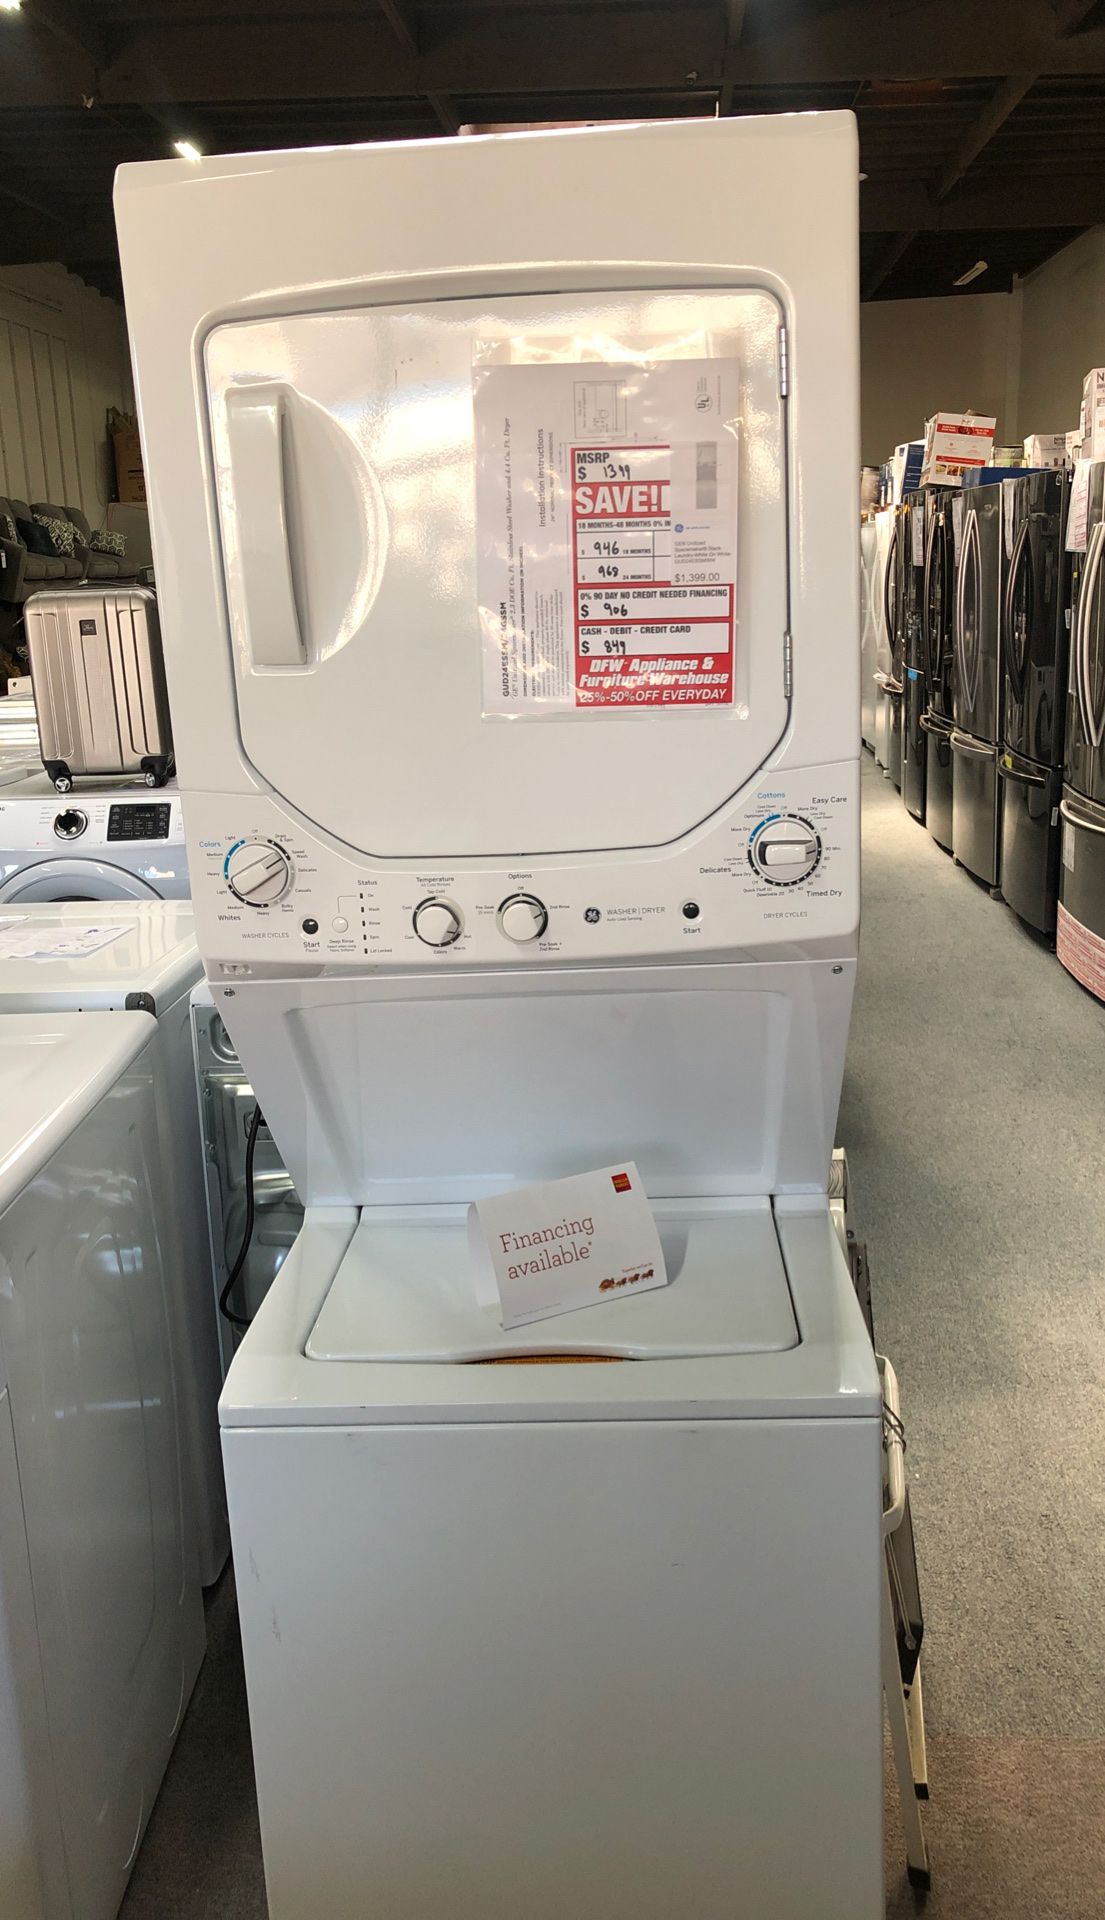 GE washer dryer stacked 24 original price $1399 our price $795 only